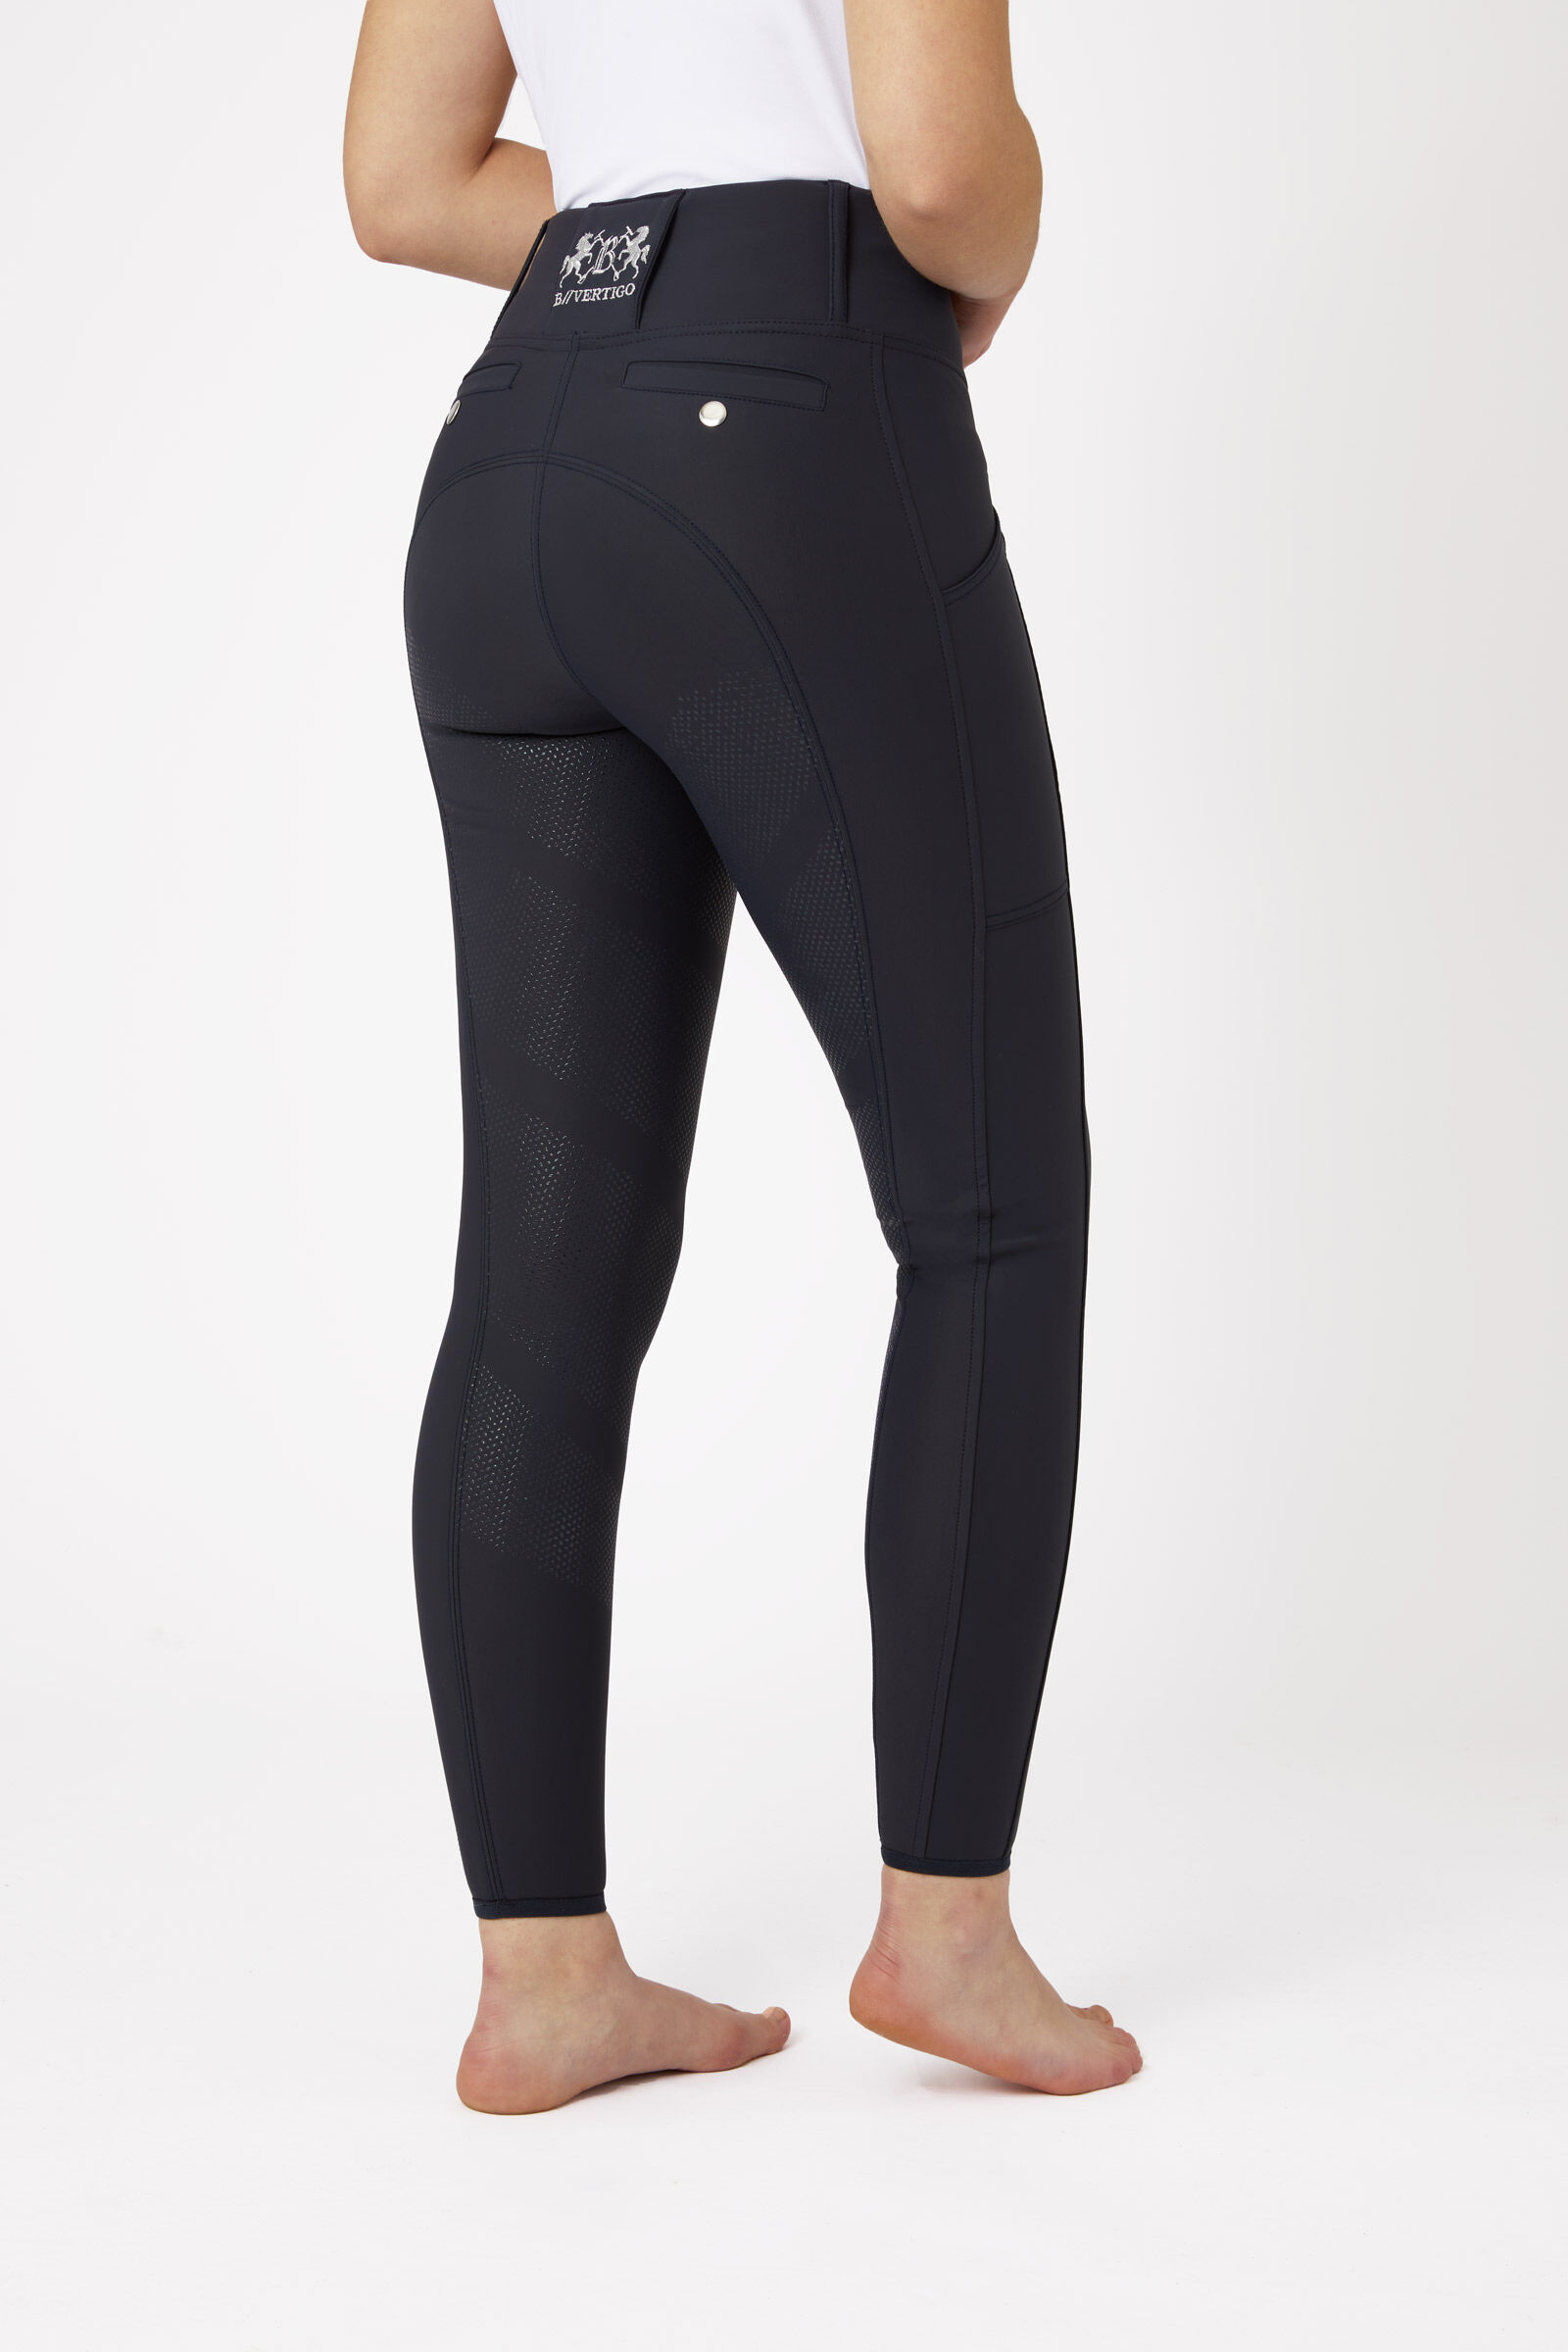 Riding Leggings Women's Full Seat with Mobile Phone Pocket, High Waist  Riding Trousers Women Girls Stretch with Belt Loops, black, S :  Amazon.co.uk: Fashion